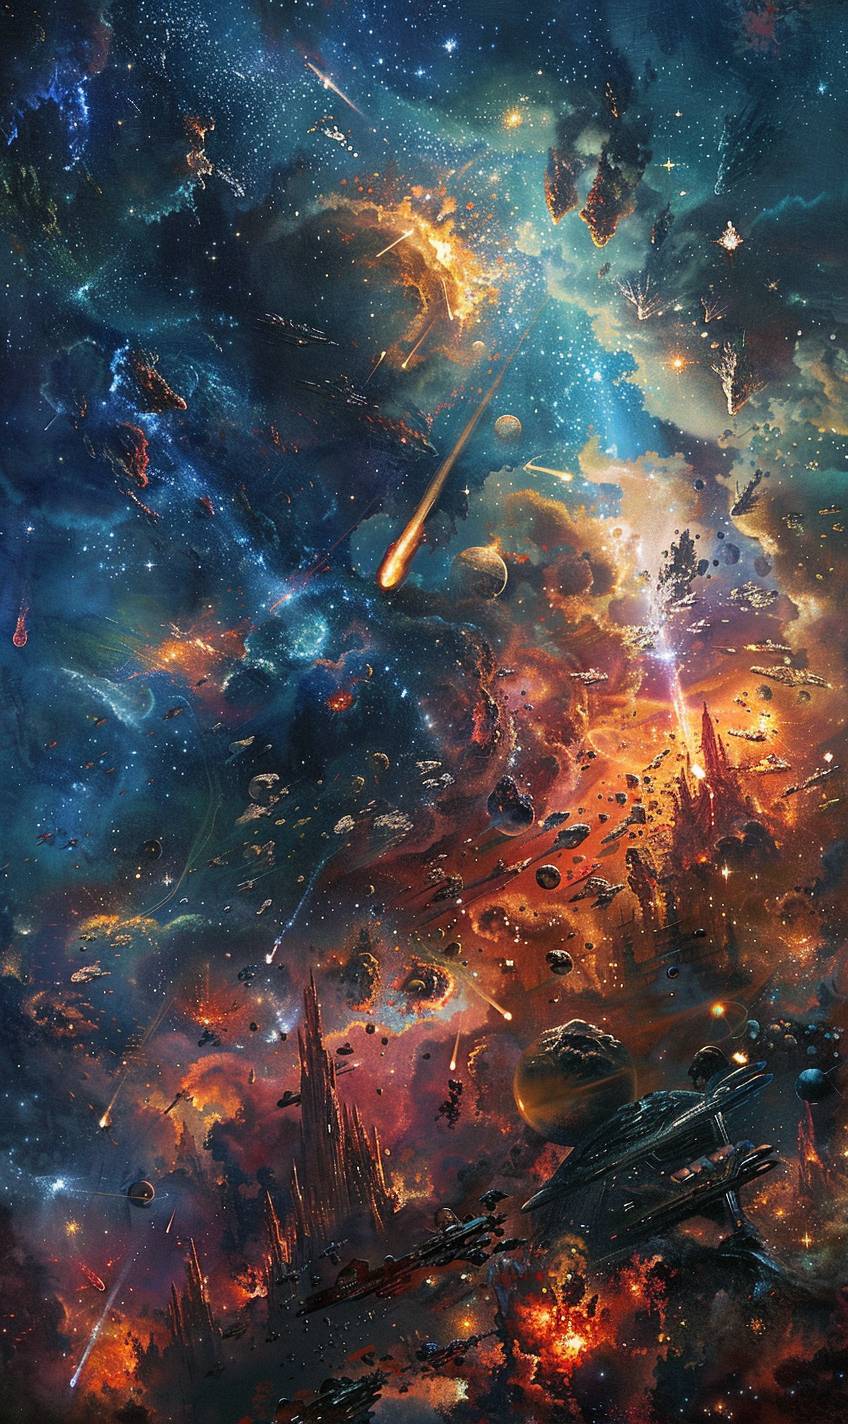 In the style of Emmanuel Shiu, cosmic battle among the stars